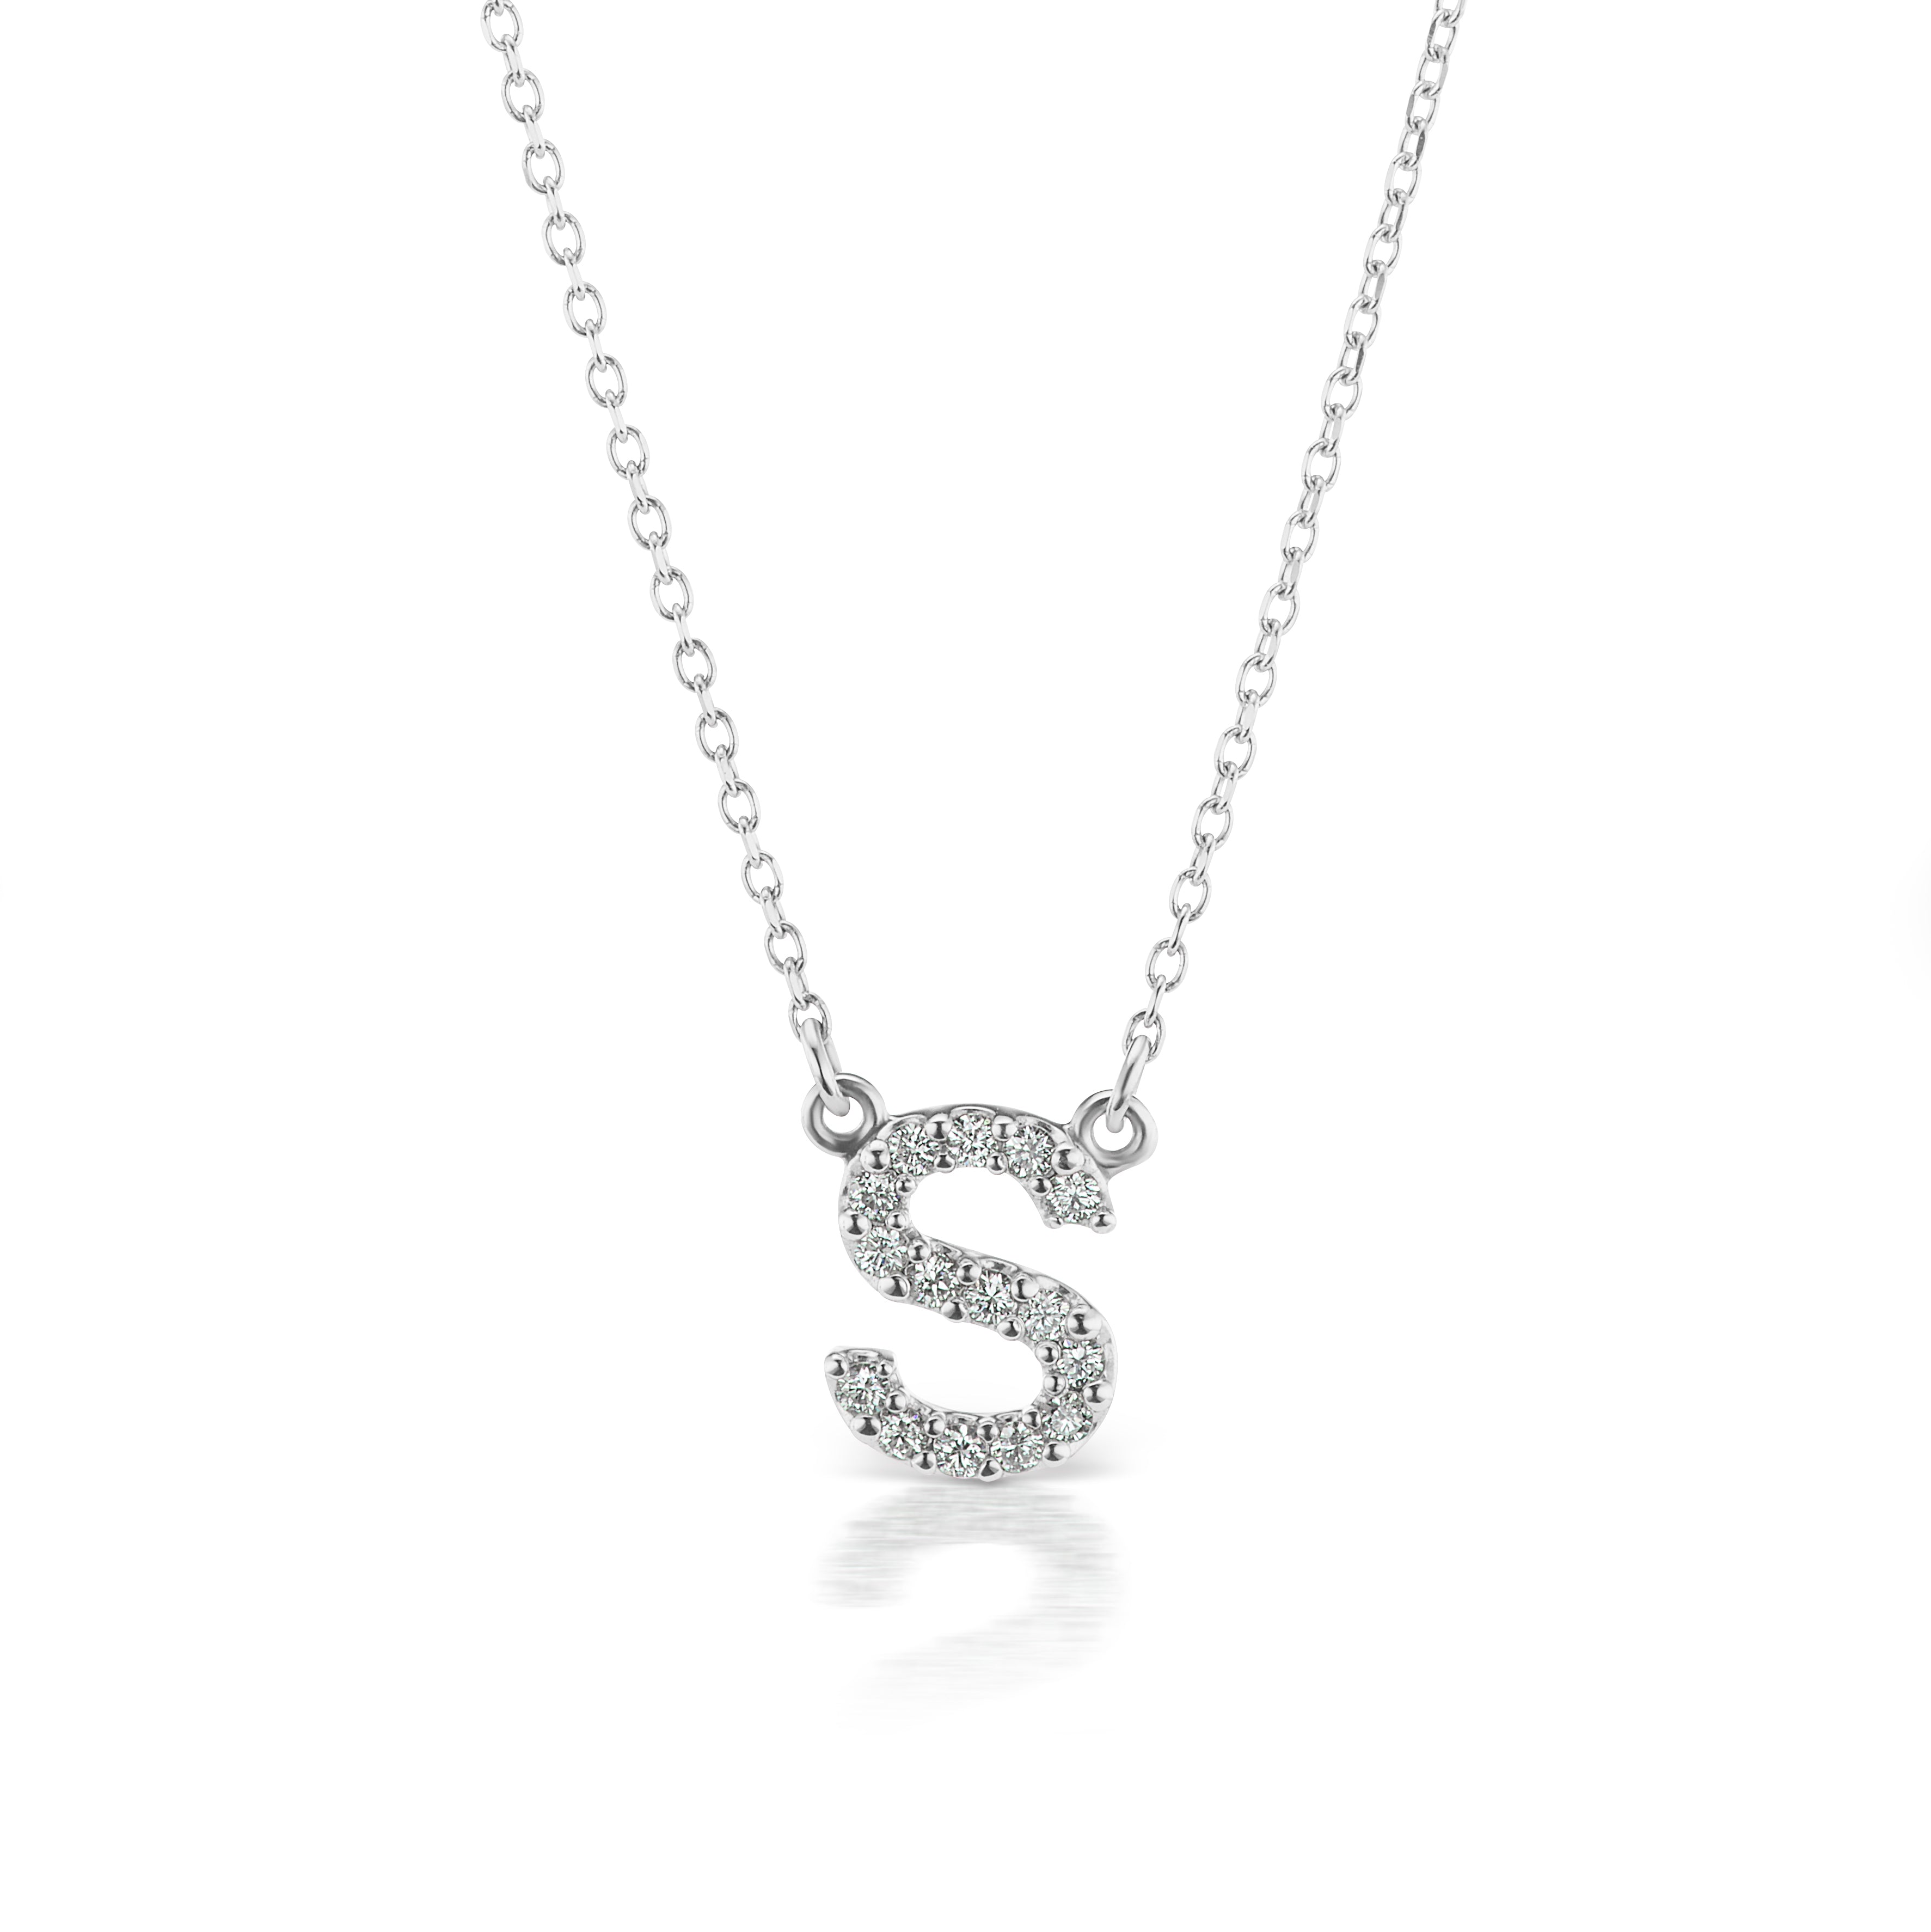 The Gold Diamond Initial Necklace